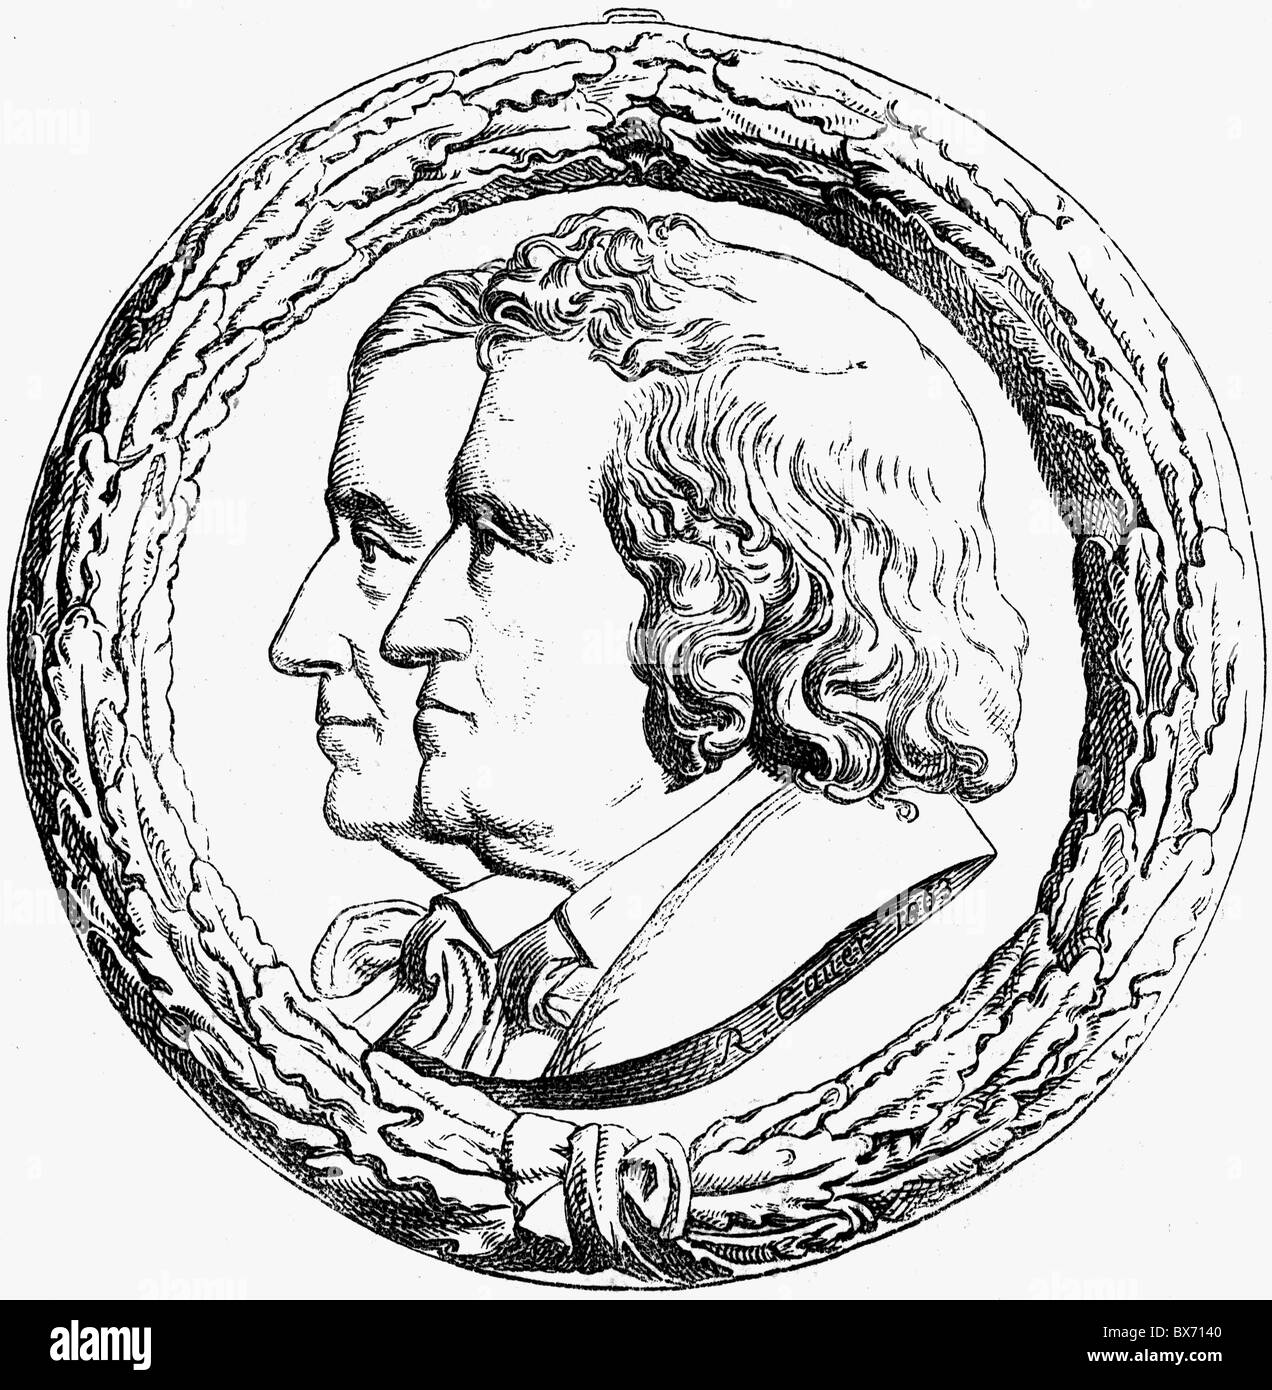 Grimm, Wilhelm, 24.2.1786 - 16.12.1859, German author / writer and linguist, portrait, with his brother Jacob, locket by Robert Cauer, wood engraving, 1863, Stock Photo